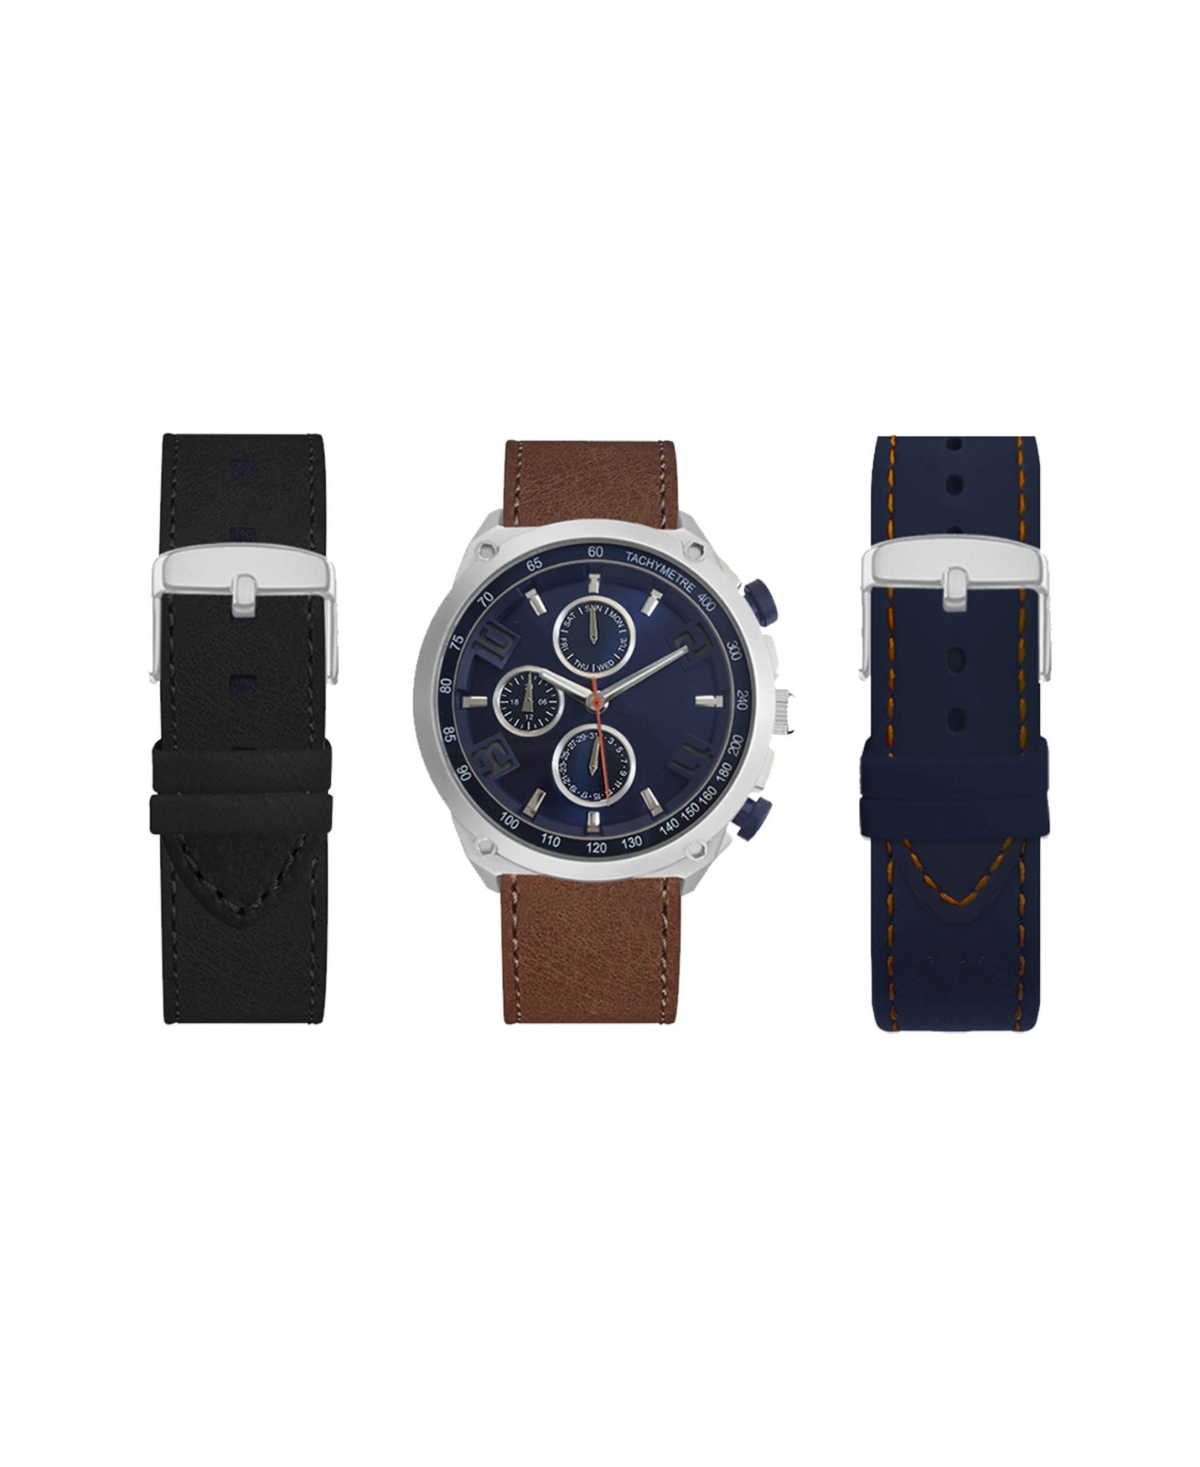 Men's Analog Black Strap Watch 47mm with Brown, Navy and Black Interchangeable Straps Set - Brown, Navy, Black